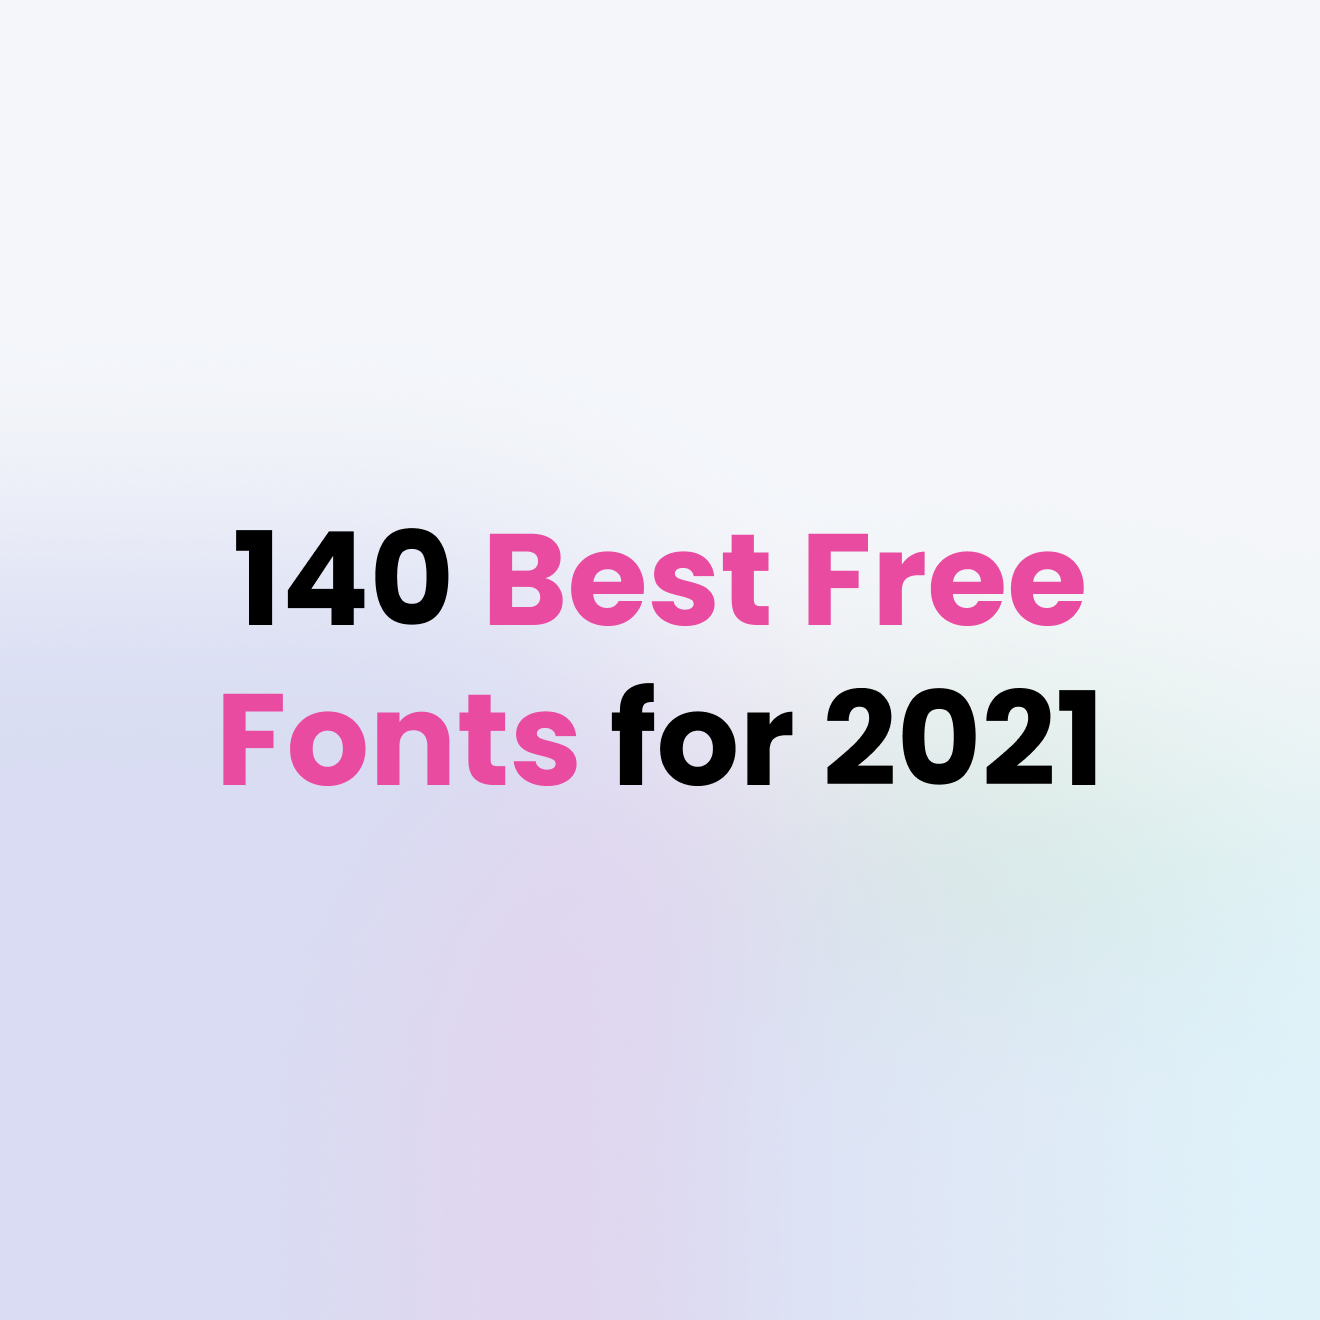 140 Best Free Fonts for 2021